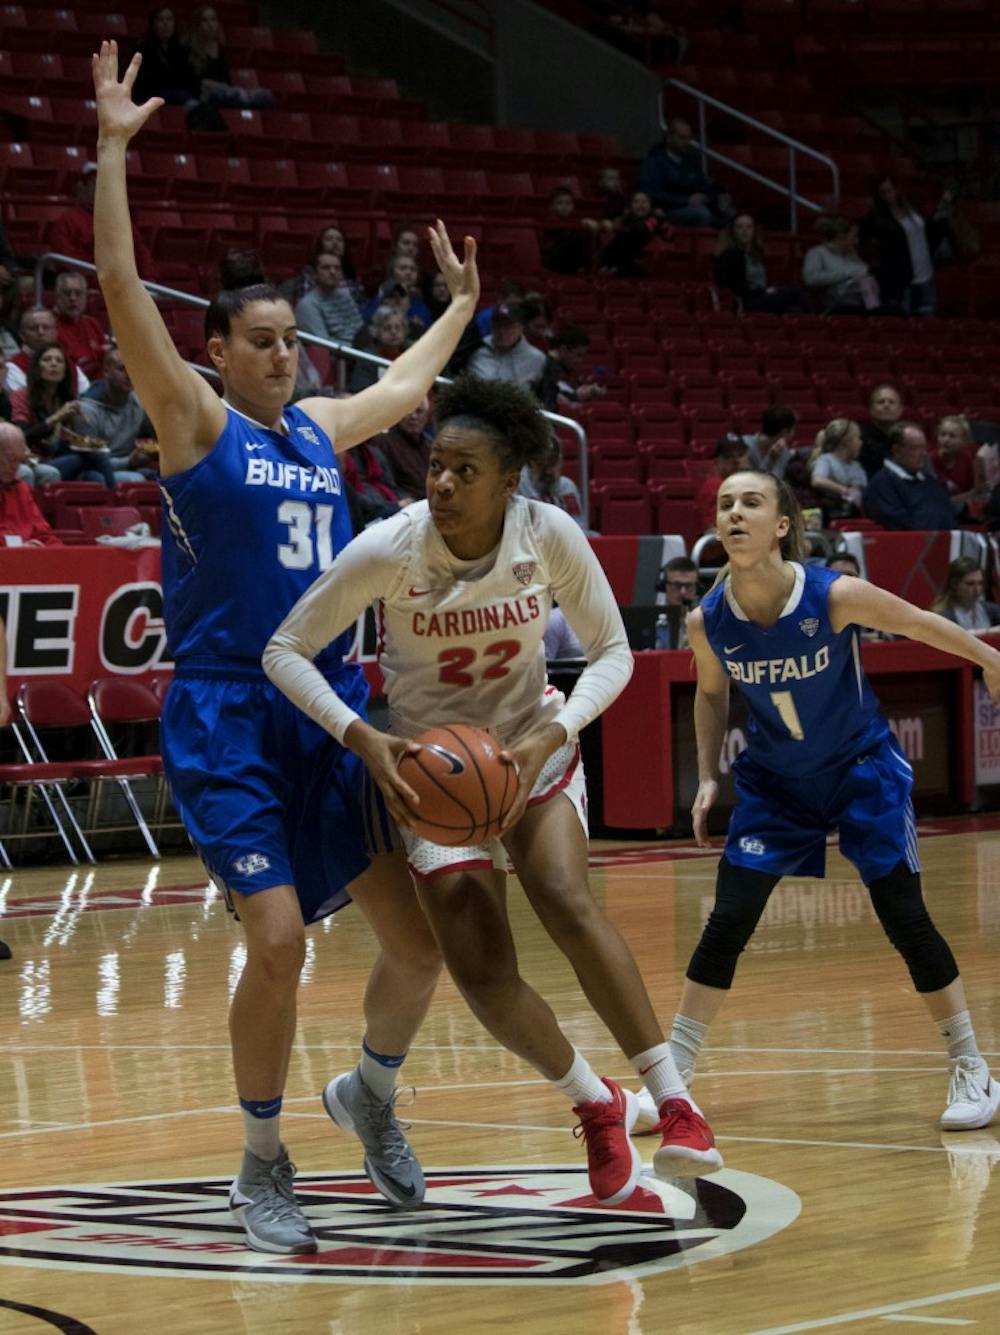 Ball State lost to Buffalo 80-84 during the game on Jan. 13 in John E. Worthen Arena. Rebecca Slezak, DN